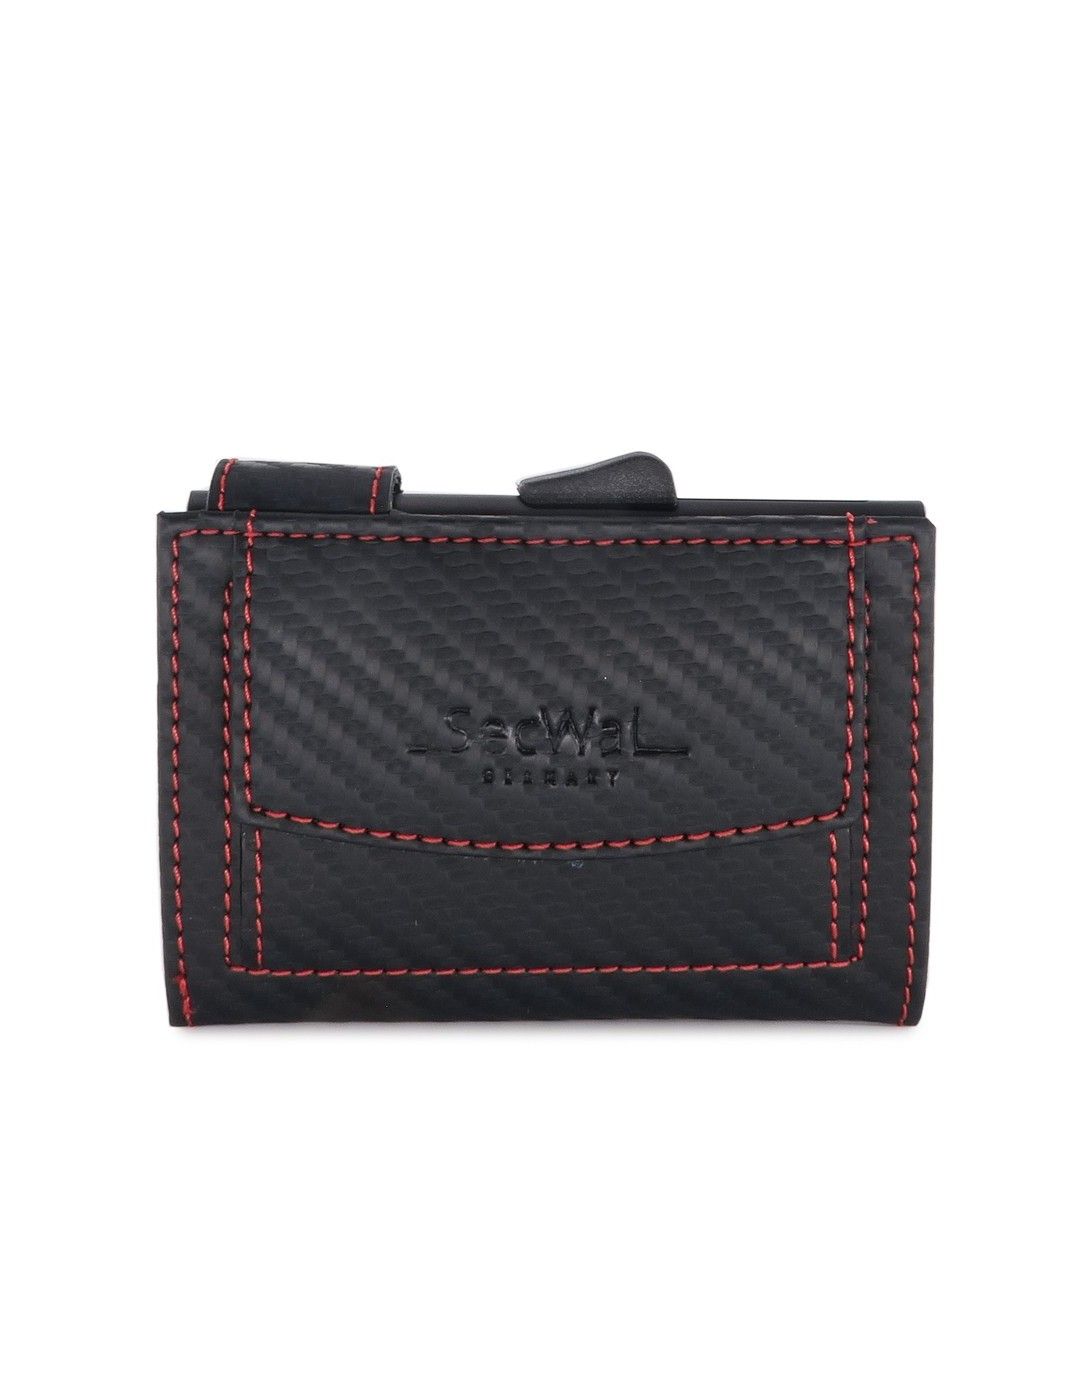 SecWal Card Case DK Leather Carbon Black-Red